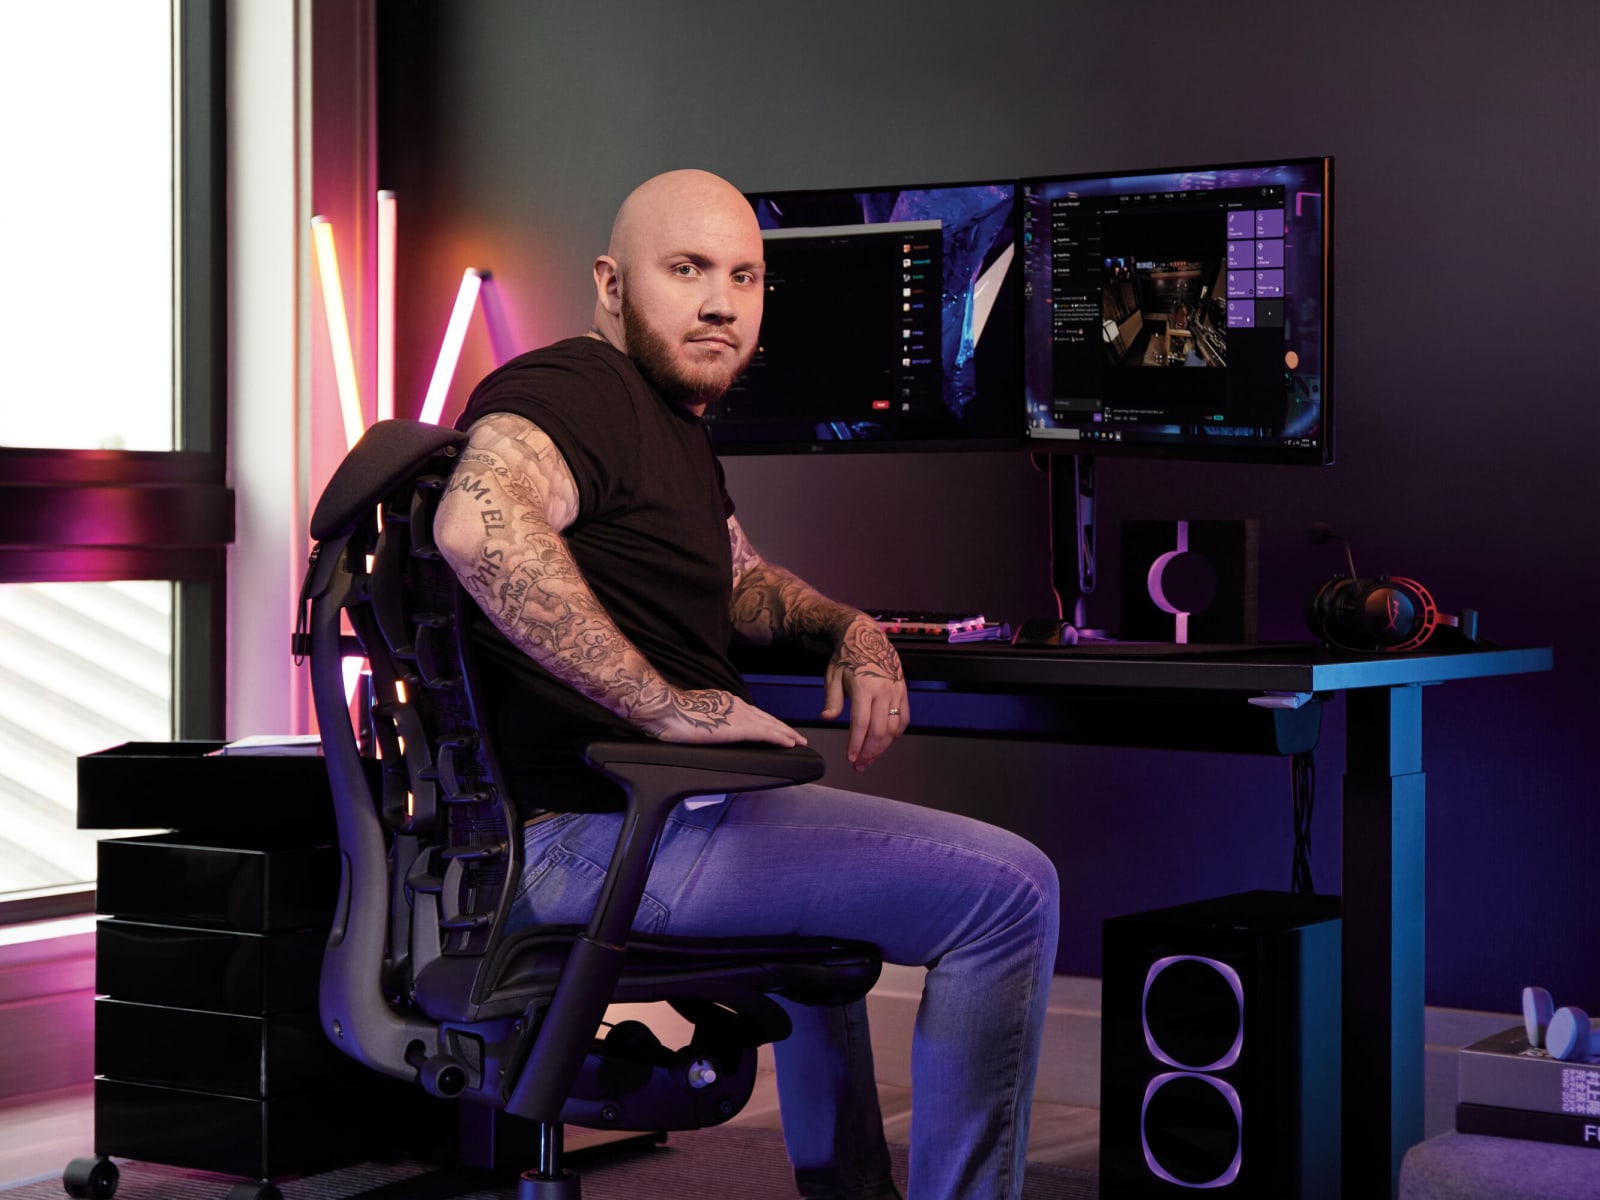 Pro streamer Timthetatman sits at his darkly lit gaming set-up with an Embody Gaming Chair, a Herman Miller sit-to-stand desk and dual monitors.